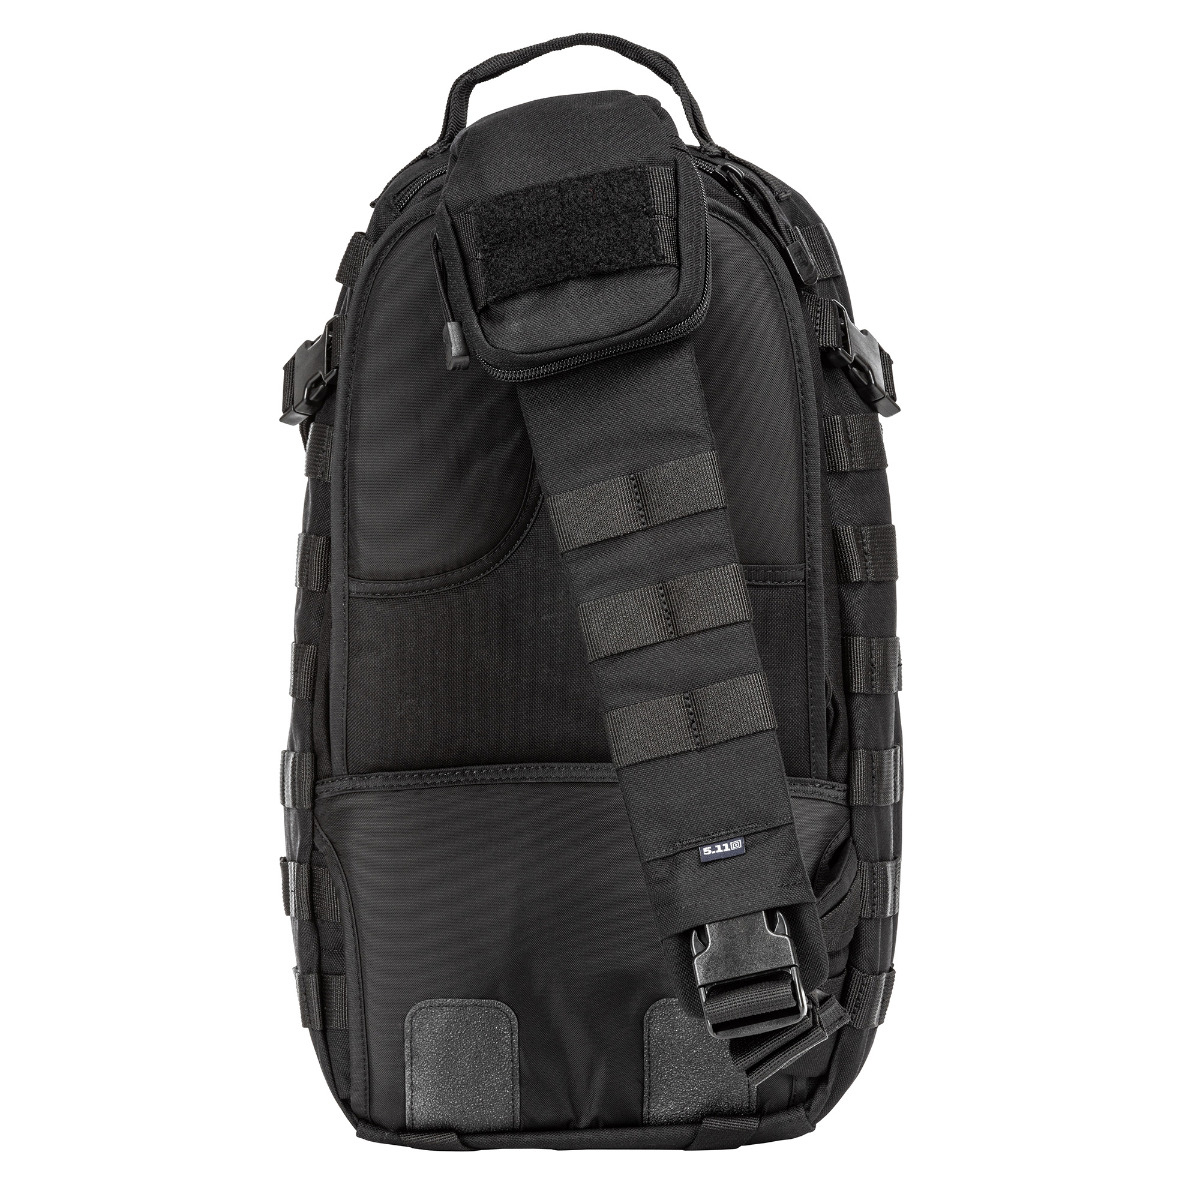 5.11 TACTICAL RUSH MOAB™ 10 PACK 56964 / BLACK 019 * NEW * Free Shipping!-img-2